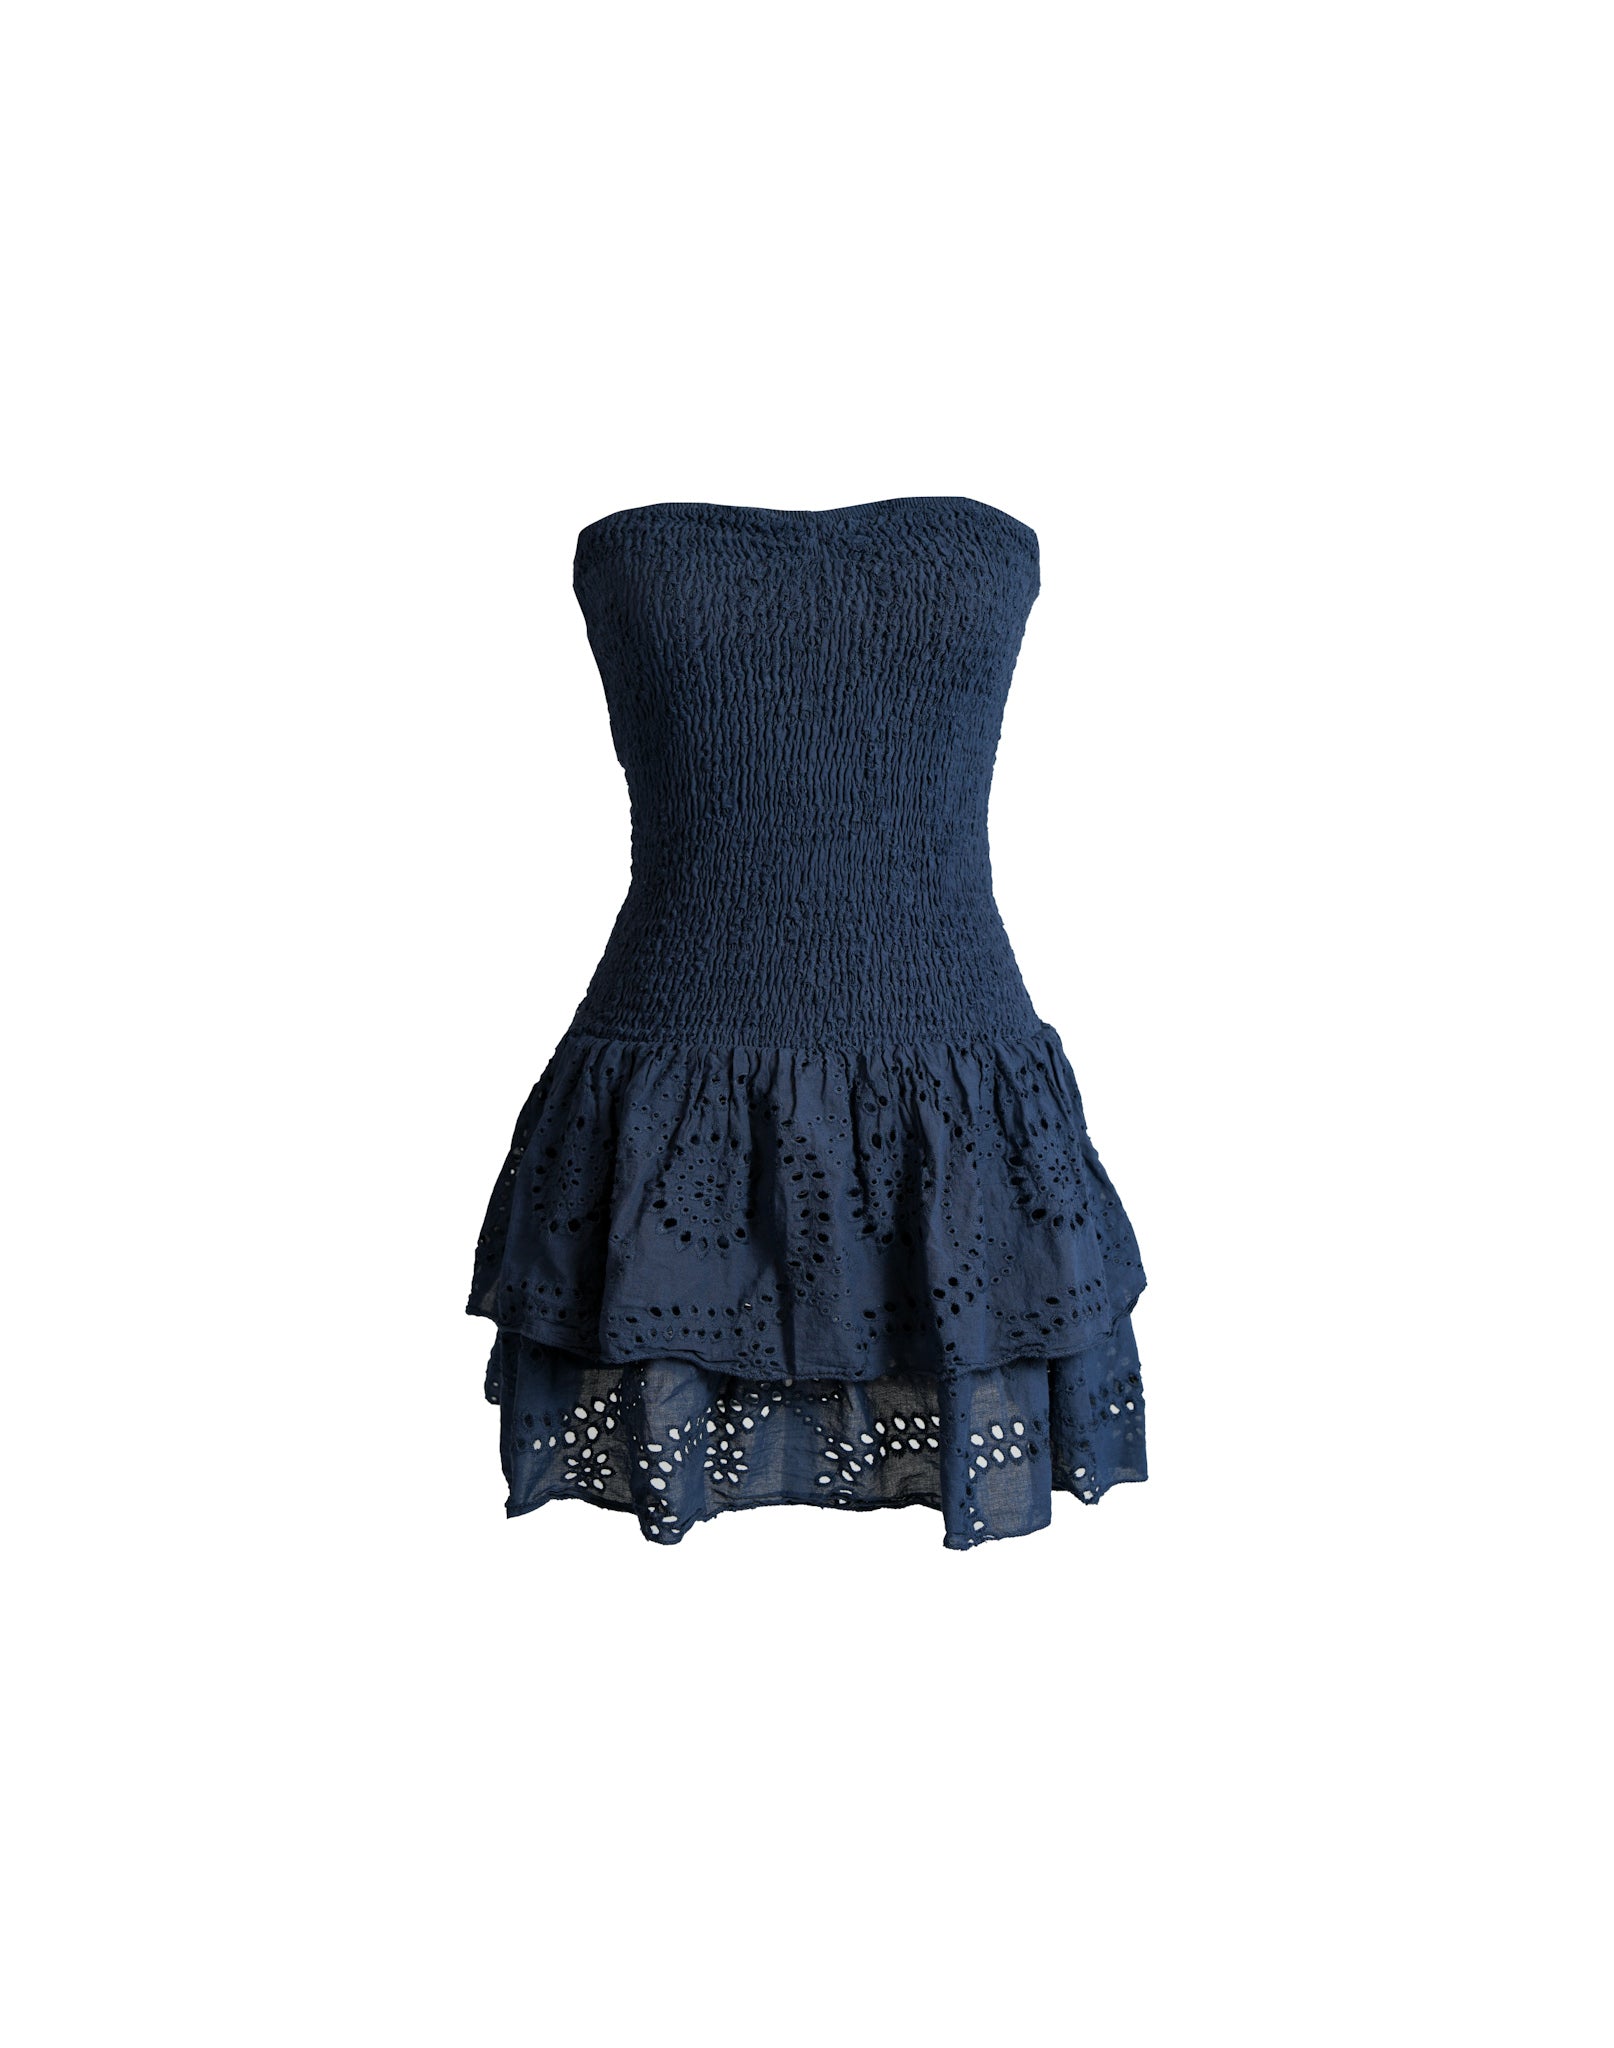 "Night out" dress navy